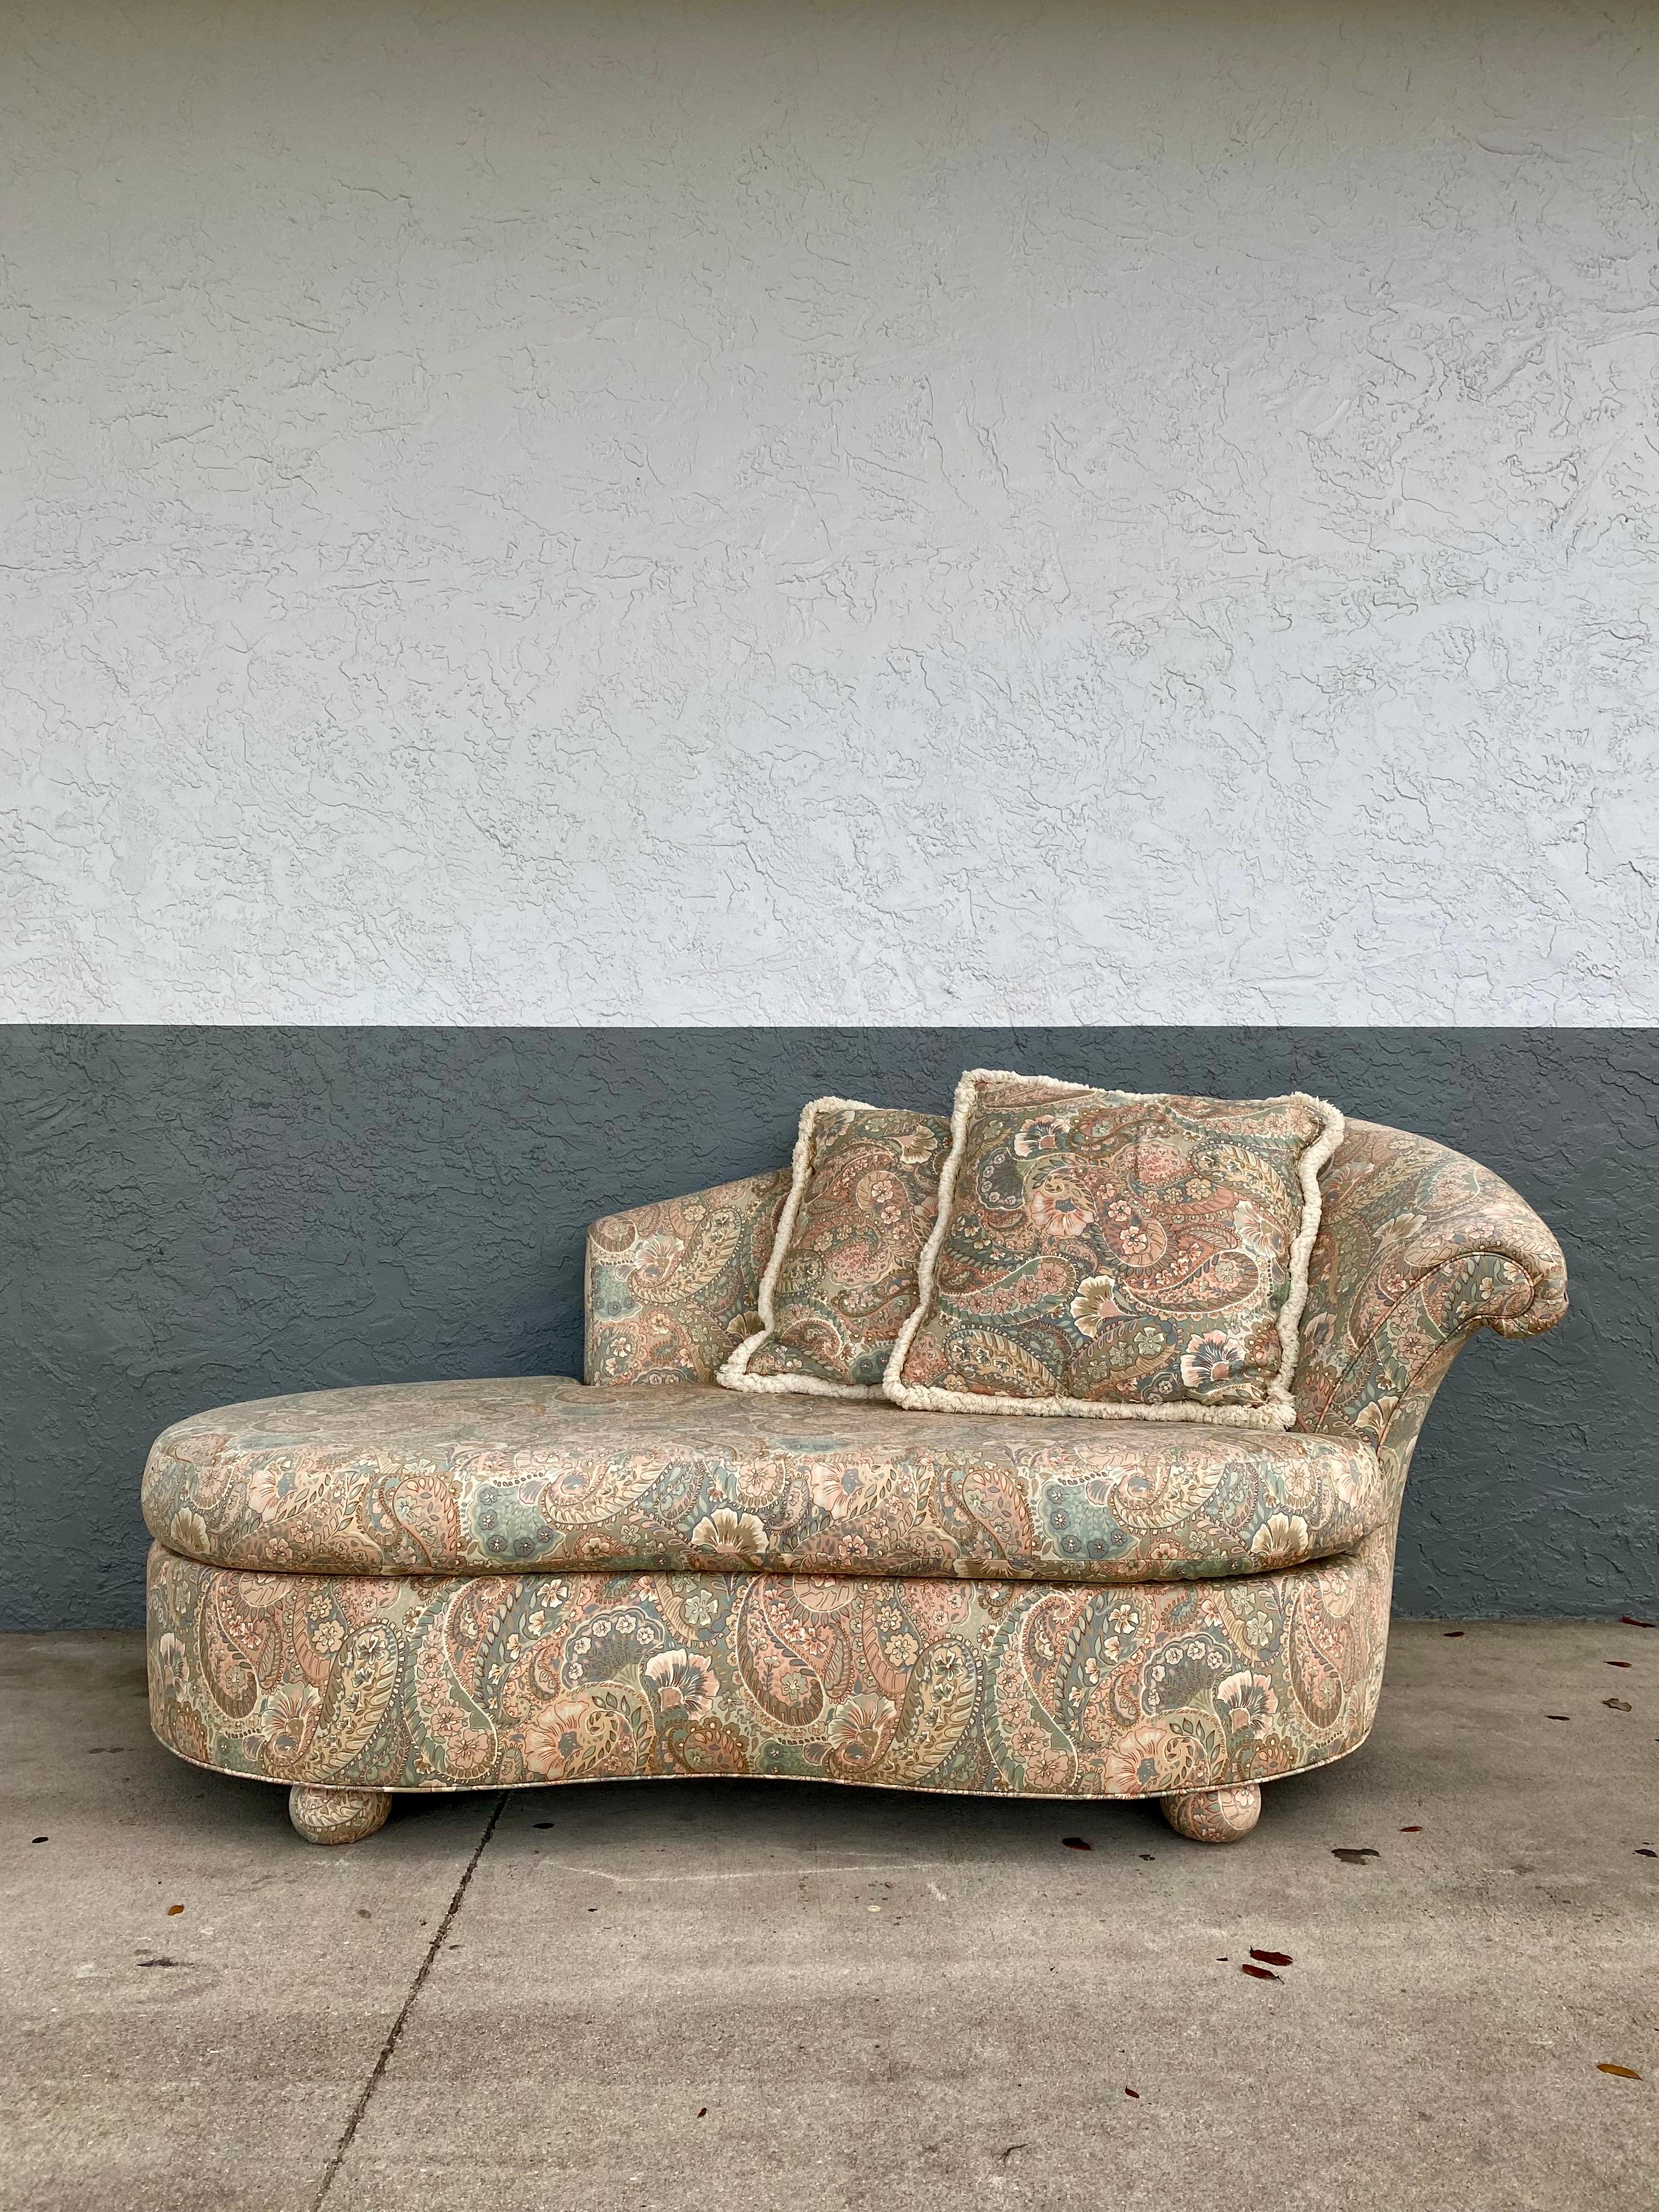 Rare Preview sculptural kidney shape paisley chaise. In style of Kagan. A statement piece which is also comfortable and packed with personality! Outstanding design is exhibited throughout the monumental form. Timeless and striking, this piece can be